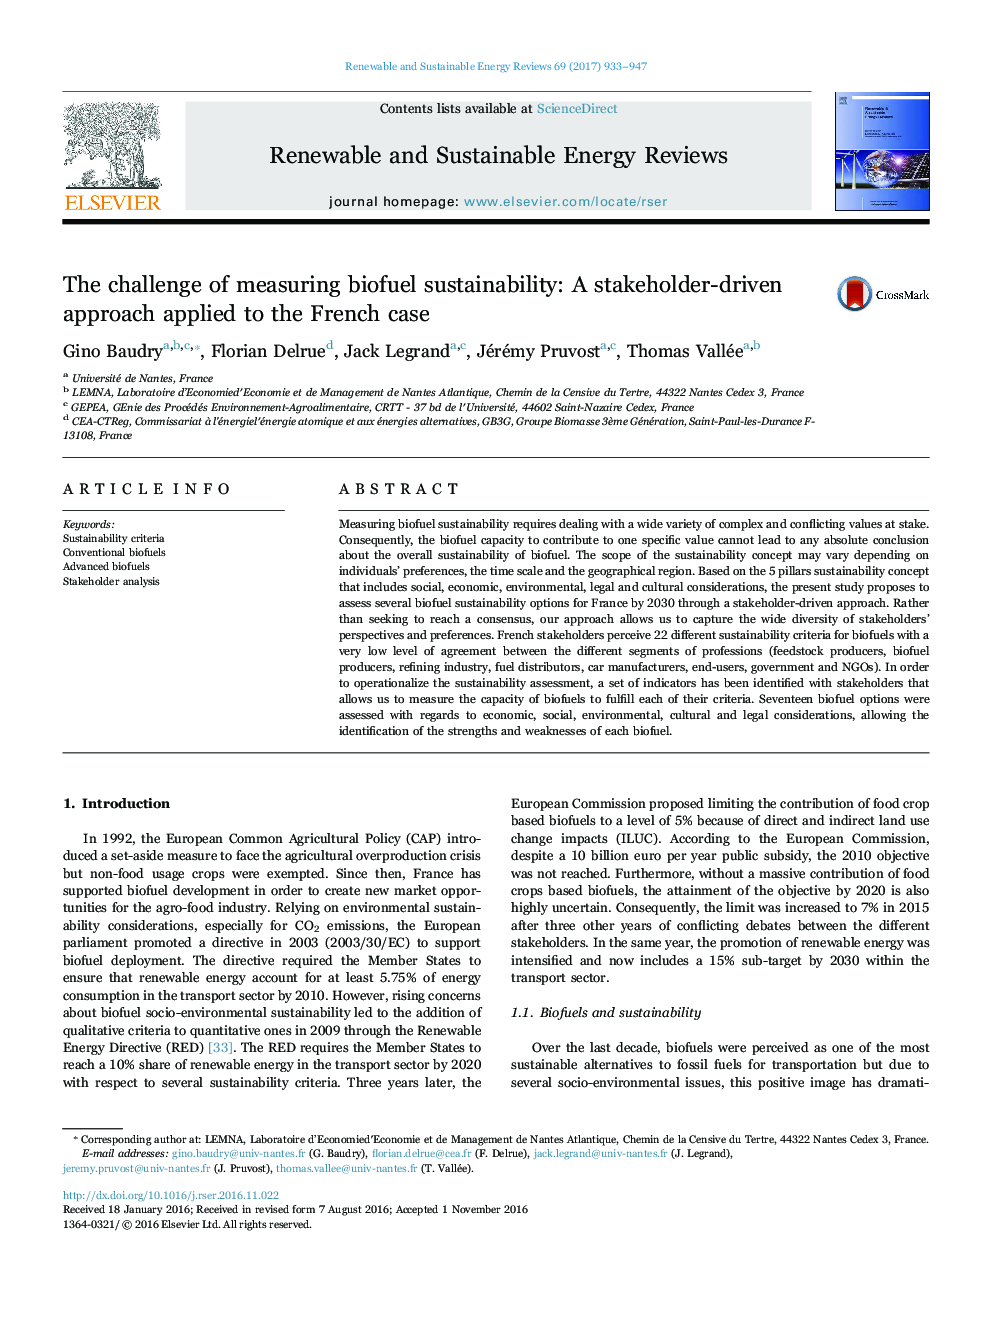 The challenge of measuring biofuel sustainability: A stakeholder-driven approach applied to the French case